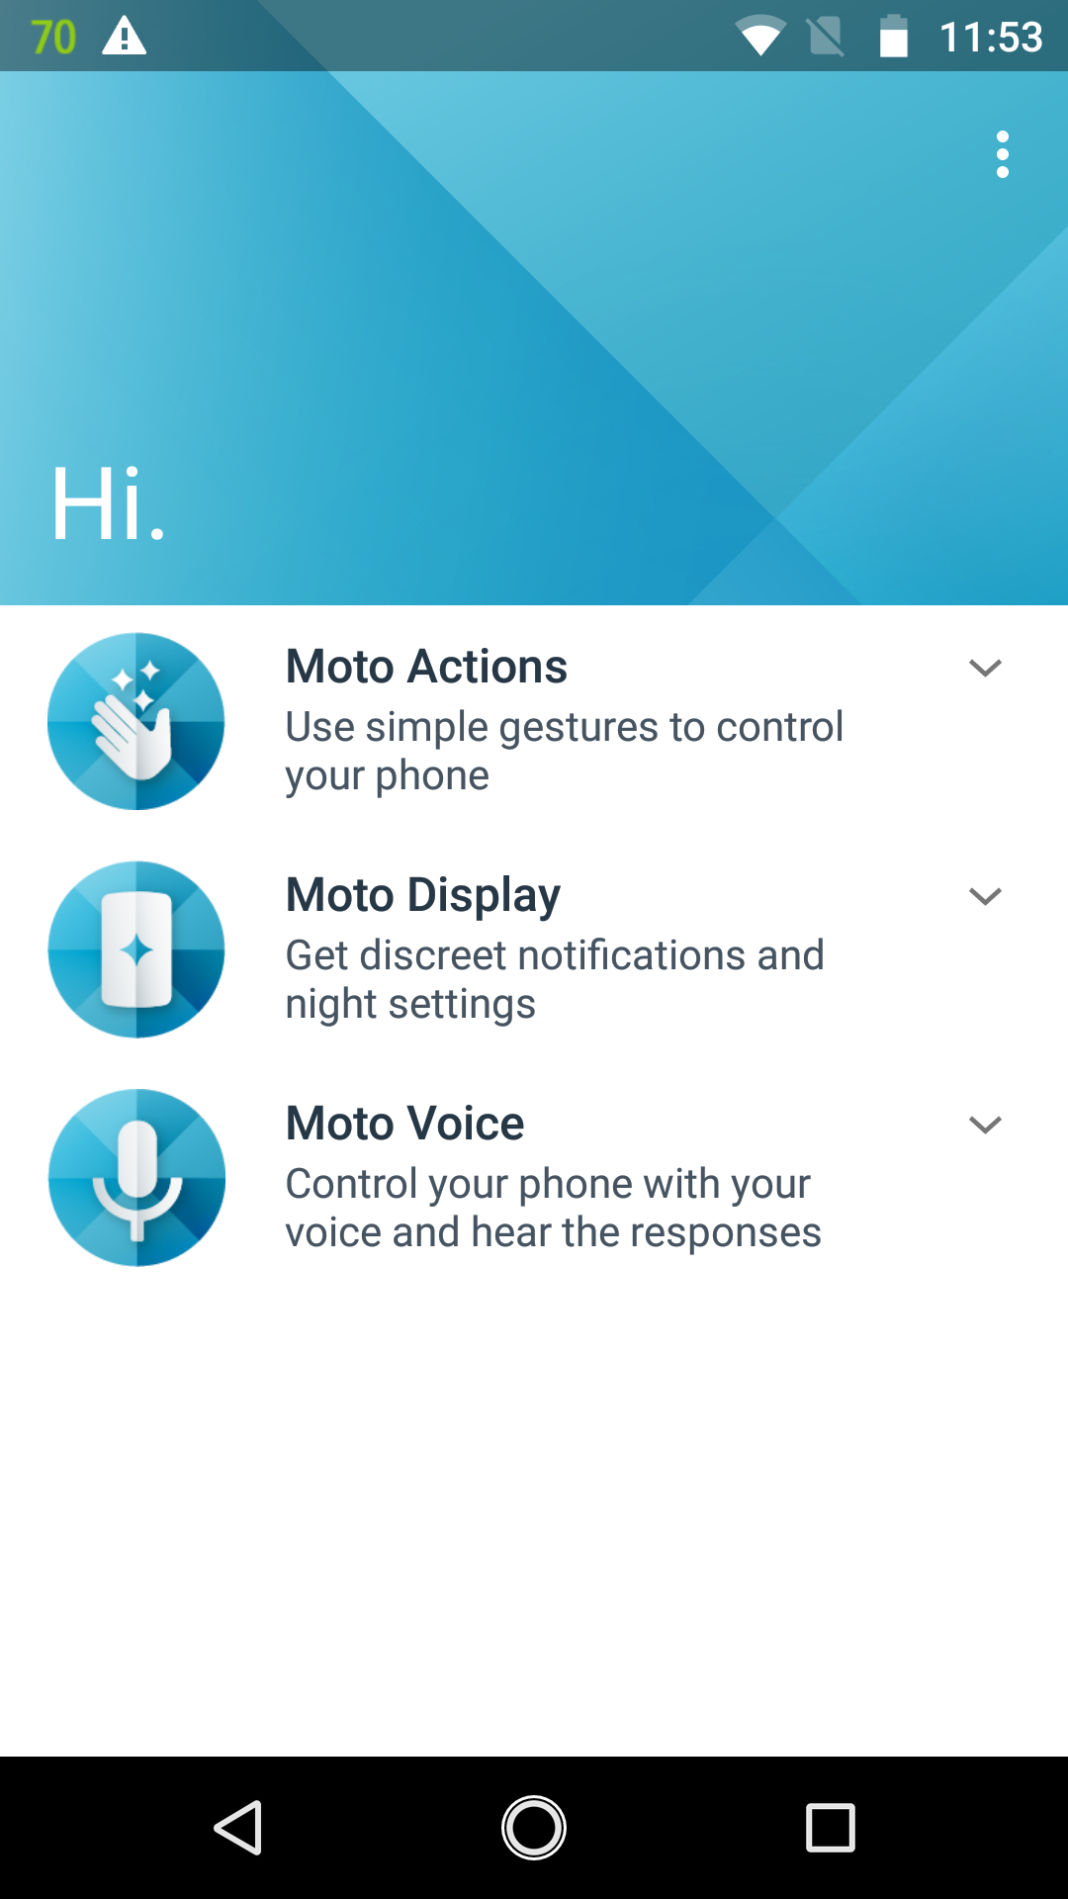 free irecorder ap for moto z2 play phone